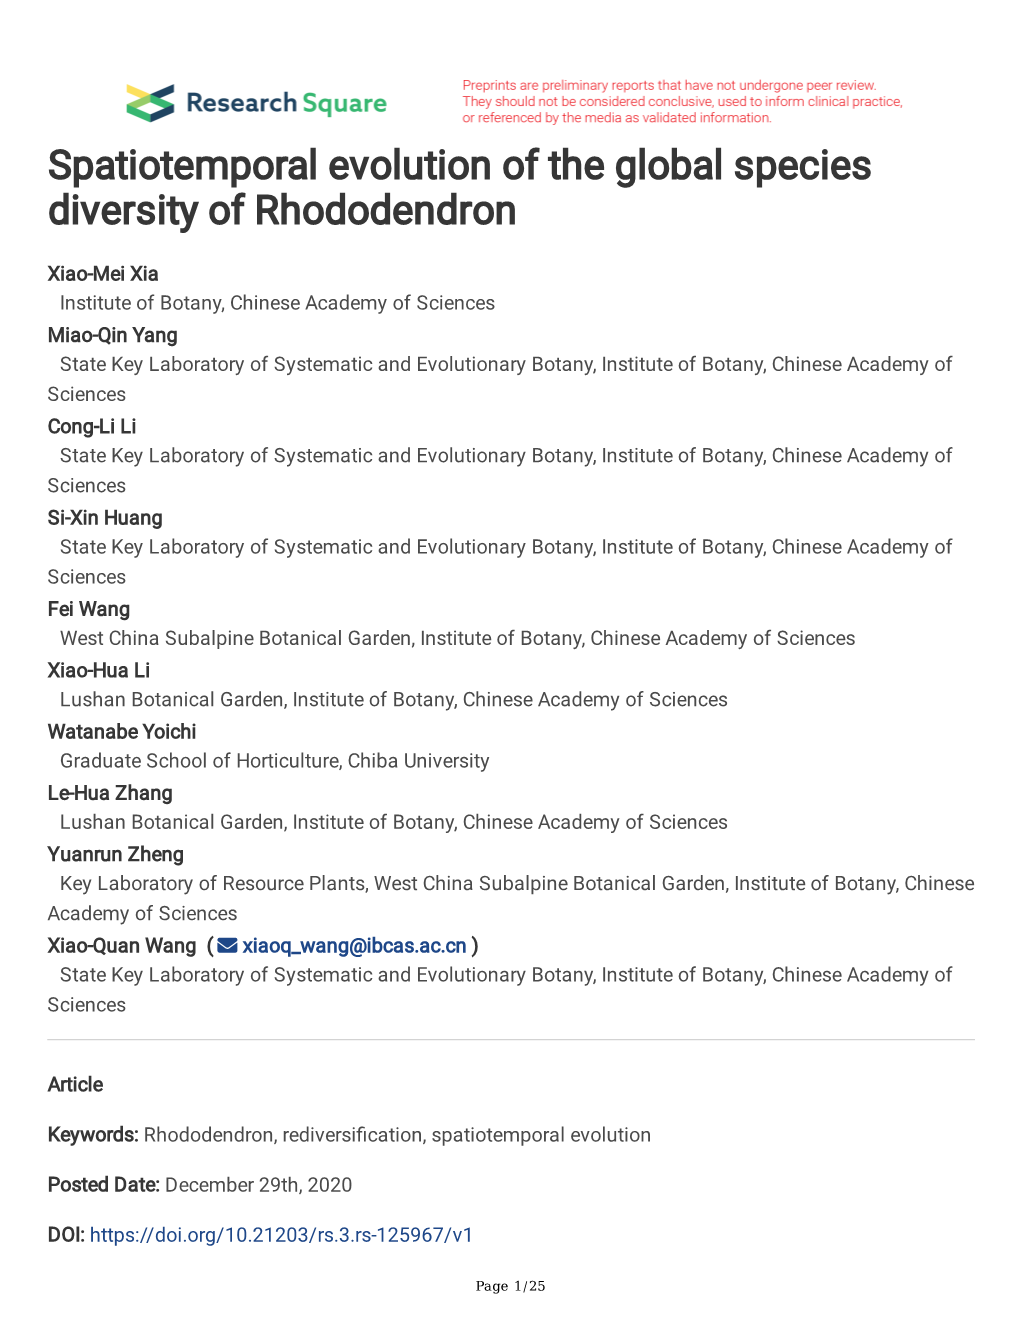 Spatiotemporal Evolution of the Global Species Diversity of Rhododendron